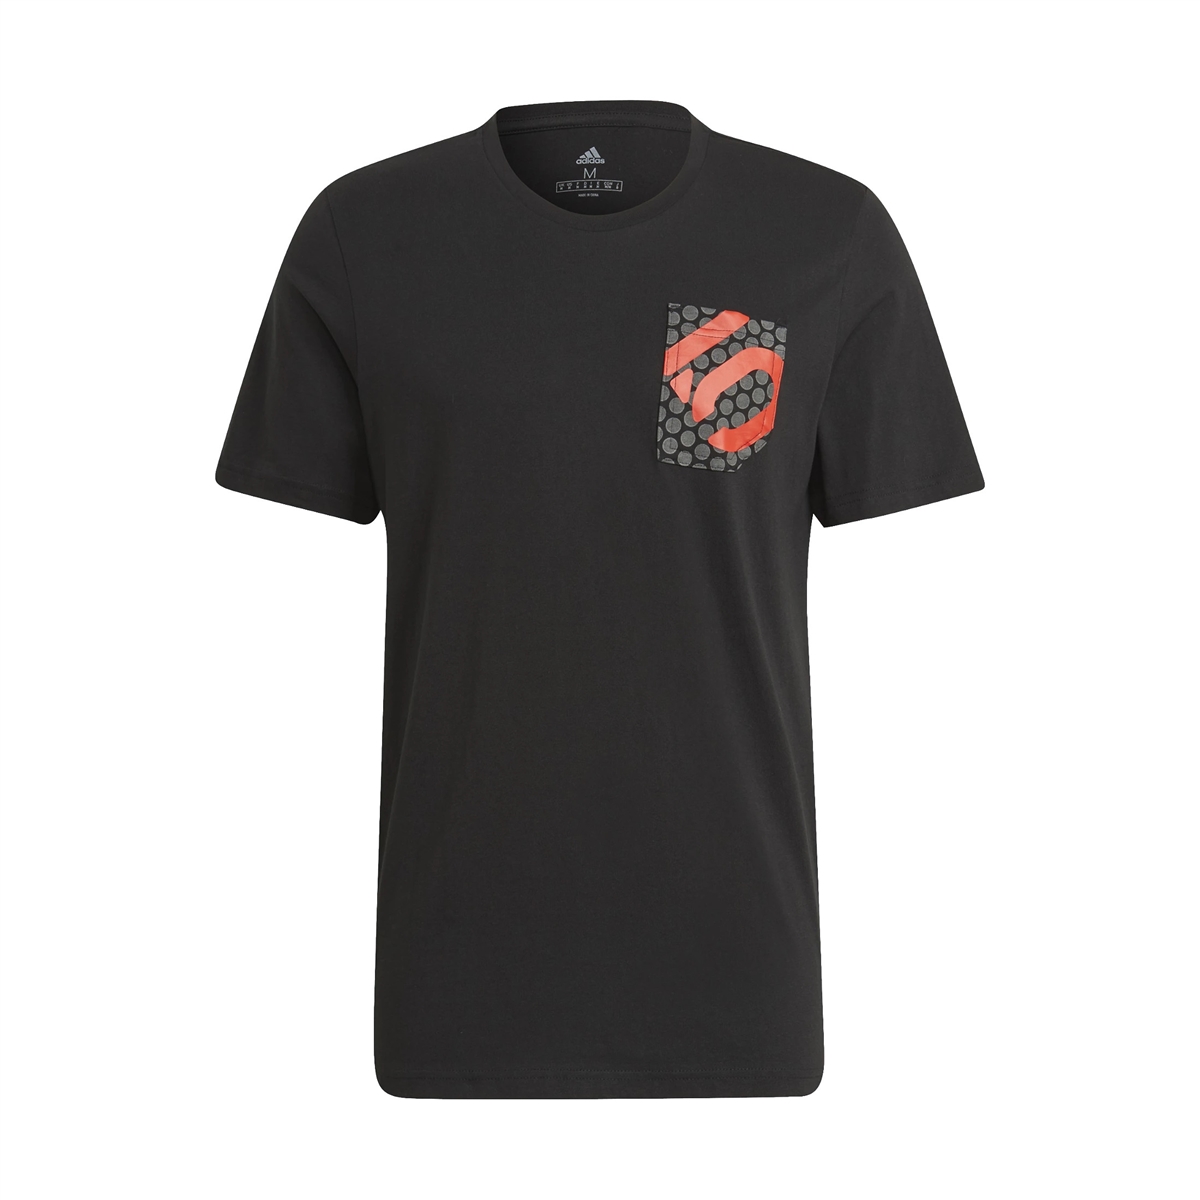 5.10 BOTB Brand of The Brave Tee Black 2021 Size S